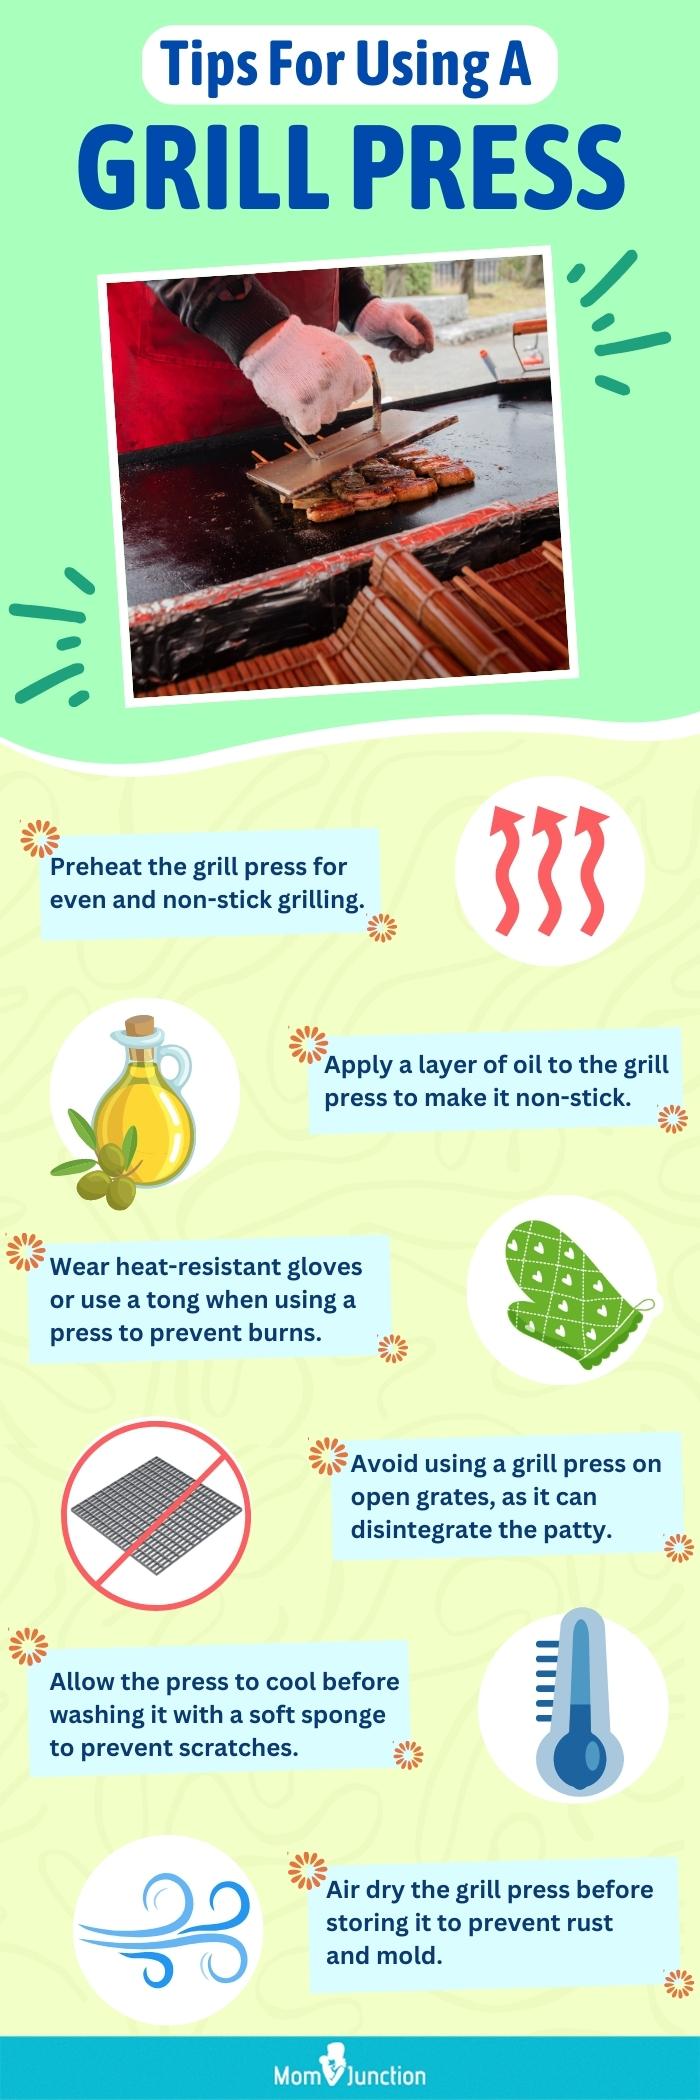 Tips For Using A Grill Press (infographic)